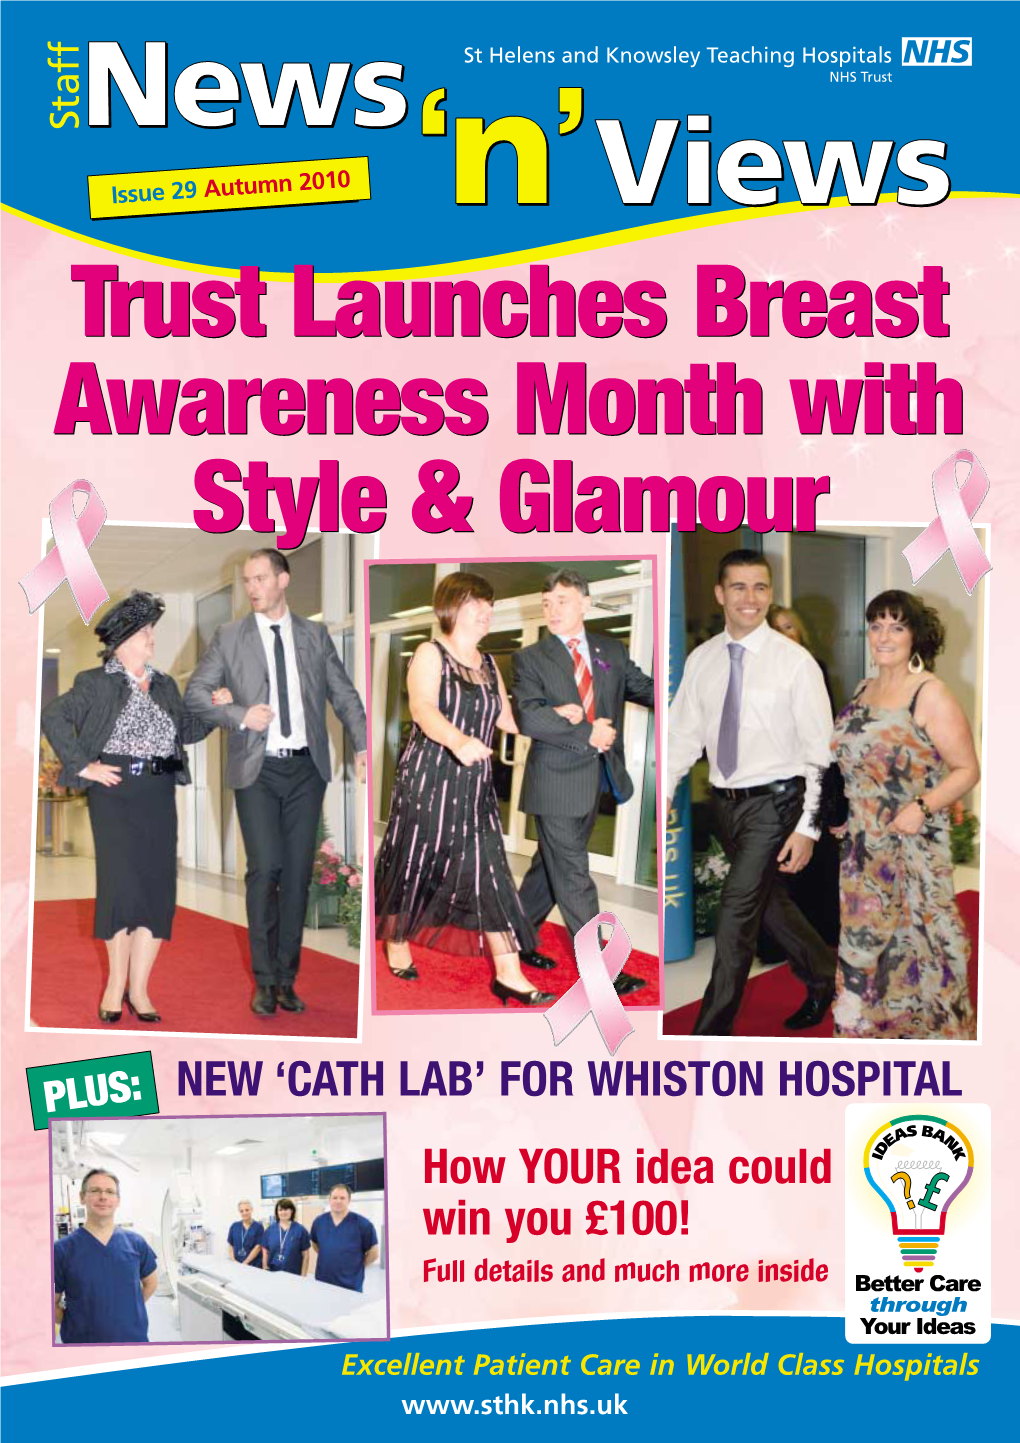 Trust Launches Breast Awareness Month with Style & Glamour Trust